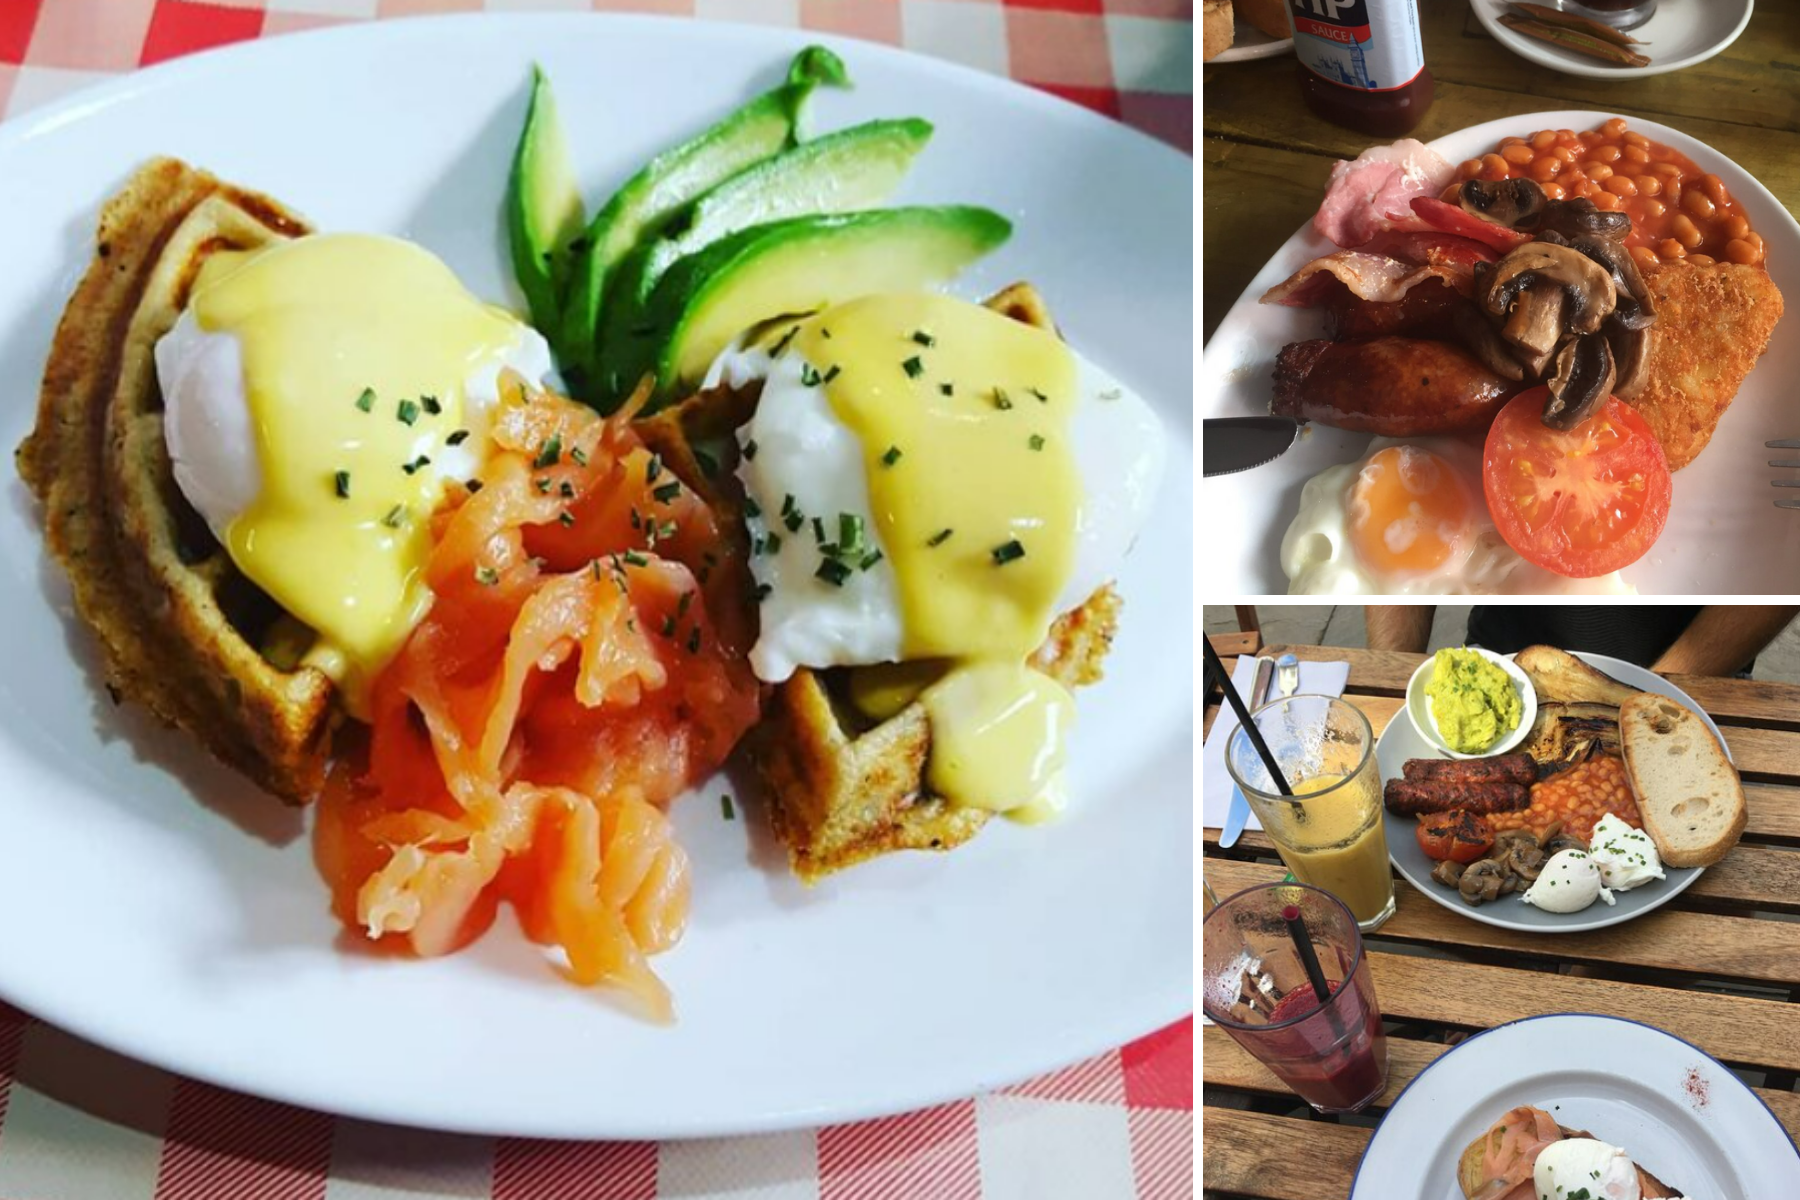 The best places for breakfast in Colchester according to Tripadvisor reviews